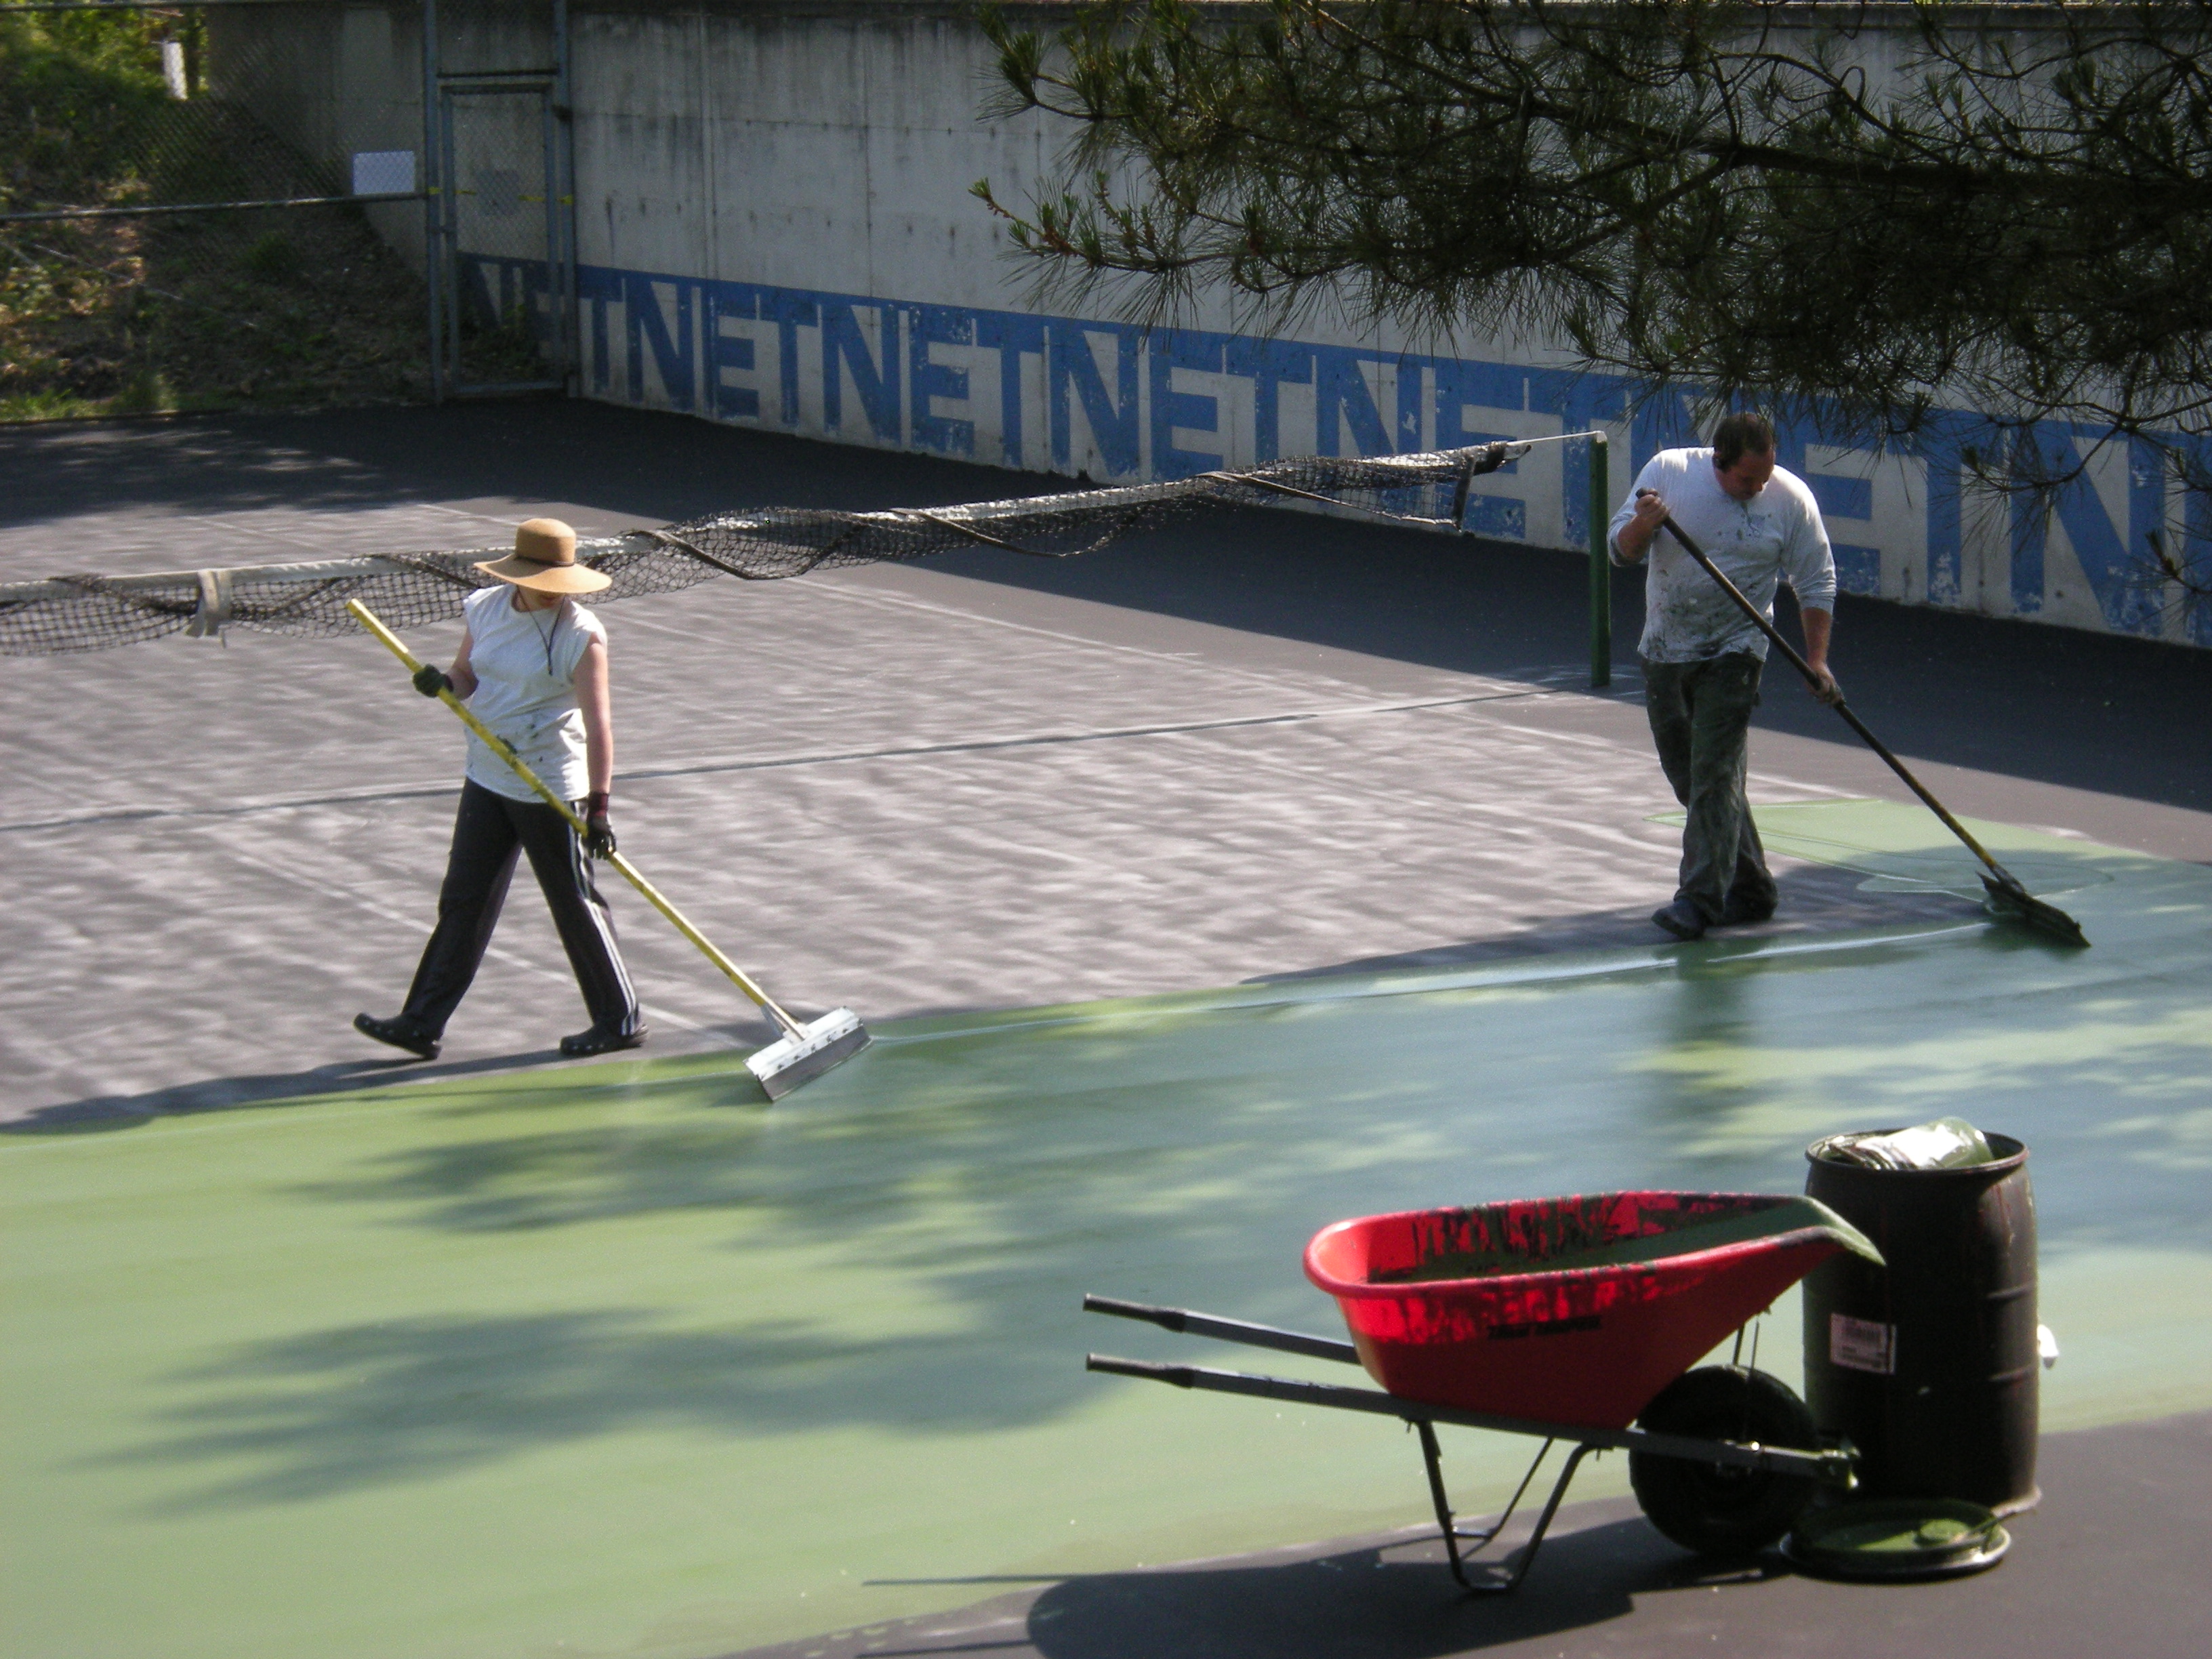 Painting surface of tennis court